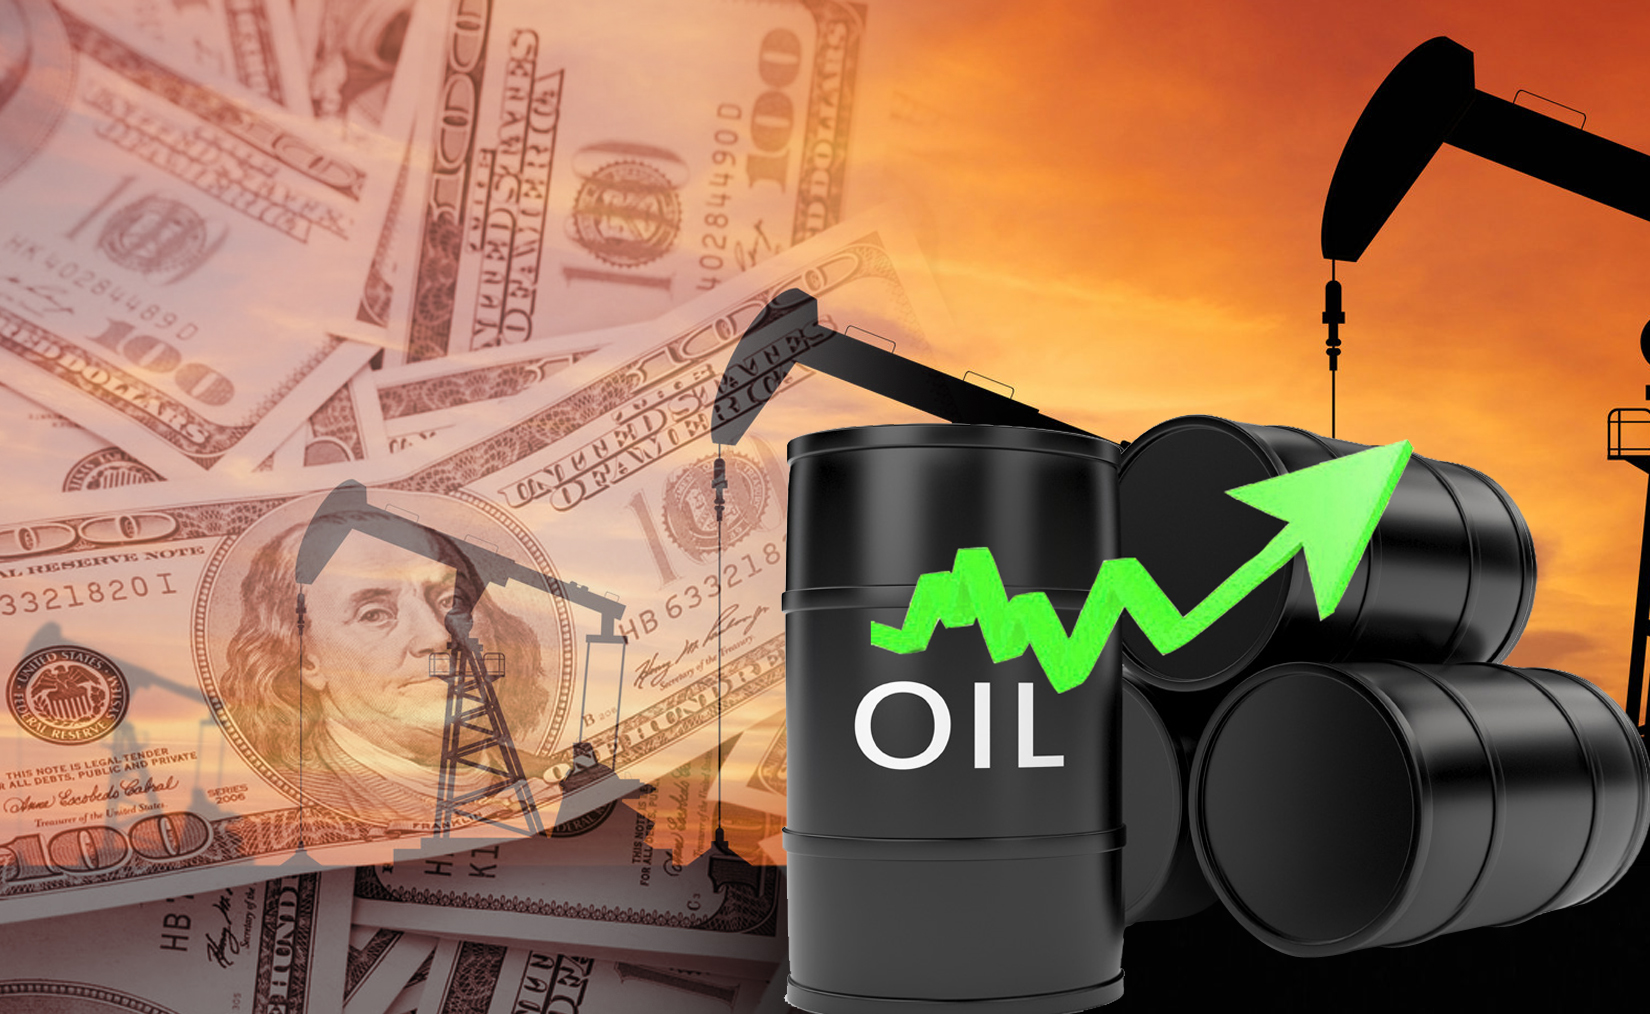 Kuwaiti oil price up one cent to stand at USD 55.03 per barrel                                                                                                                                                                                            